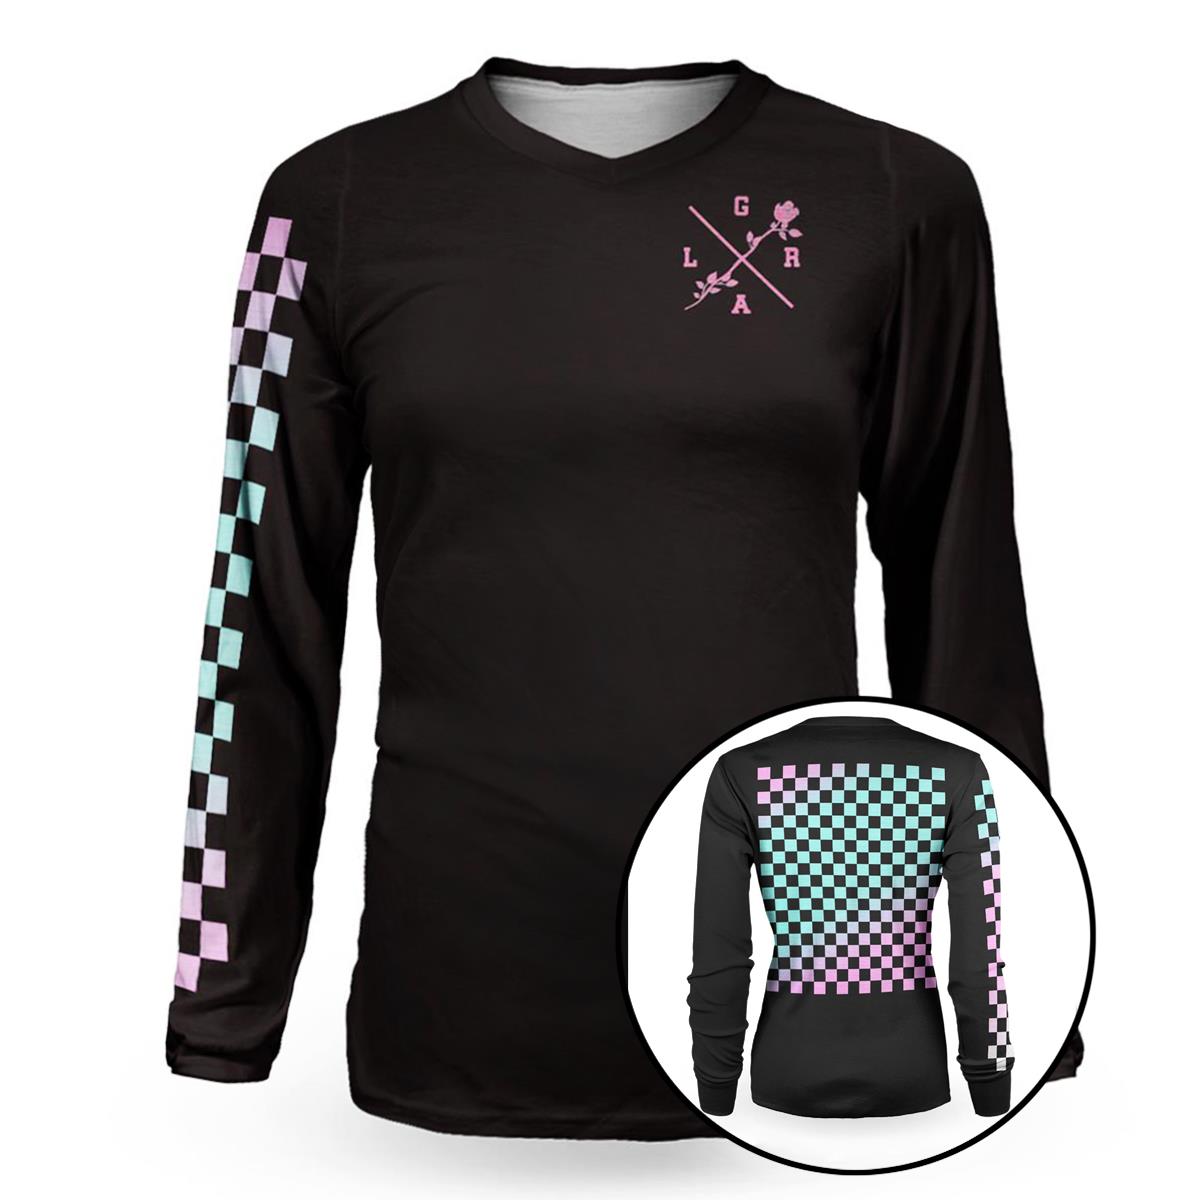 Loose Riders Girls Bike Jersey Cult of Shred Checkers - Black/Turquoise/Pink